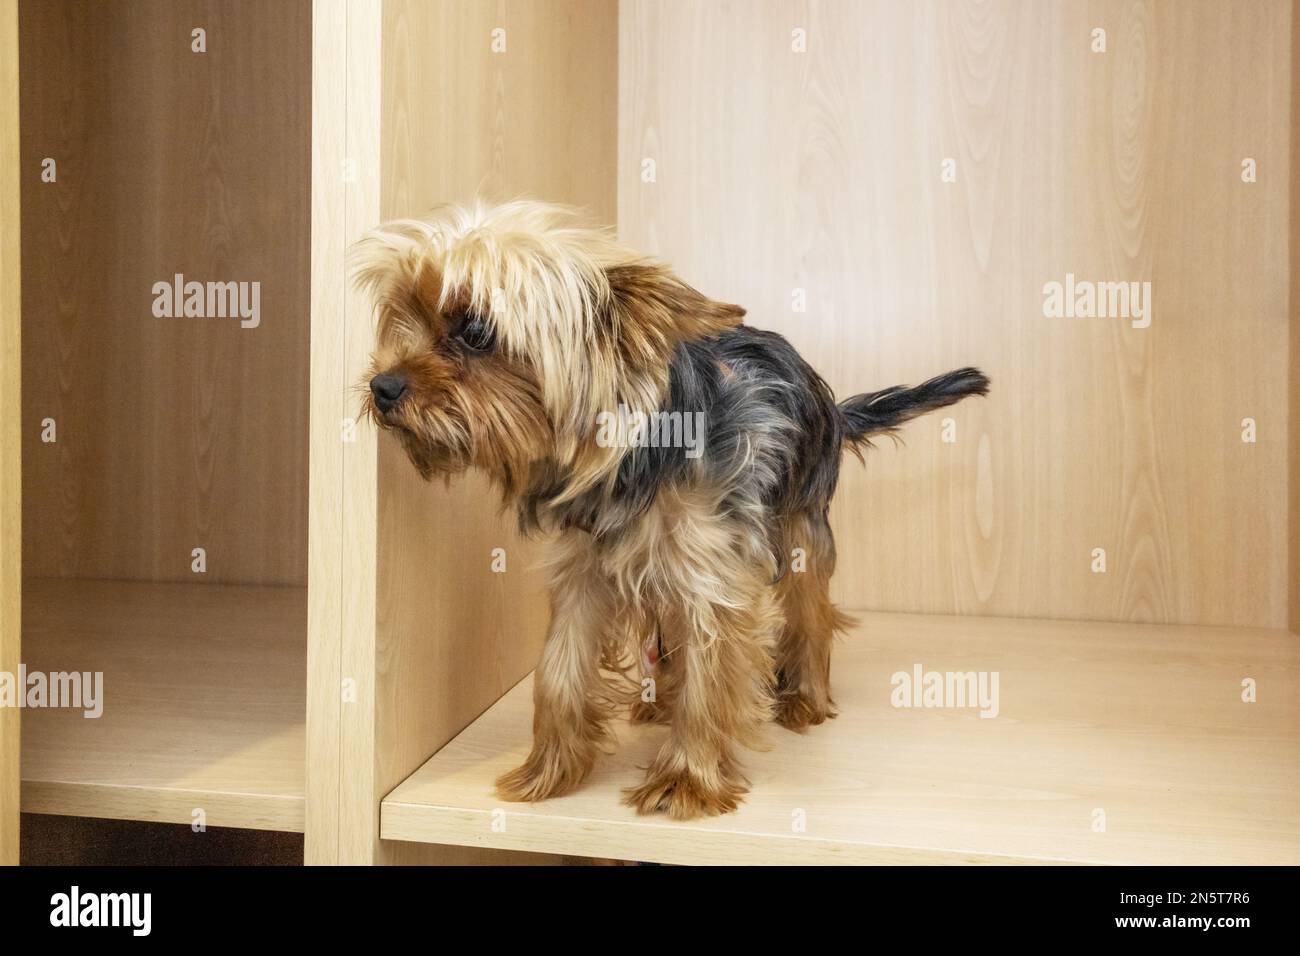 A nice and curious puppy inside a closet watching the situation Stock Photo